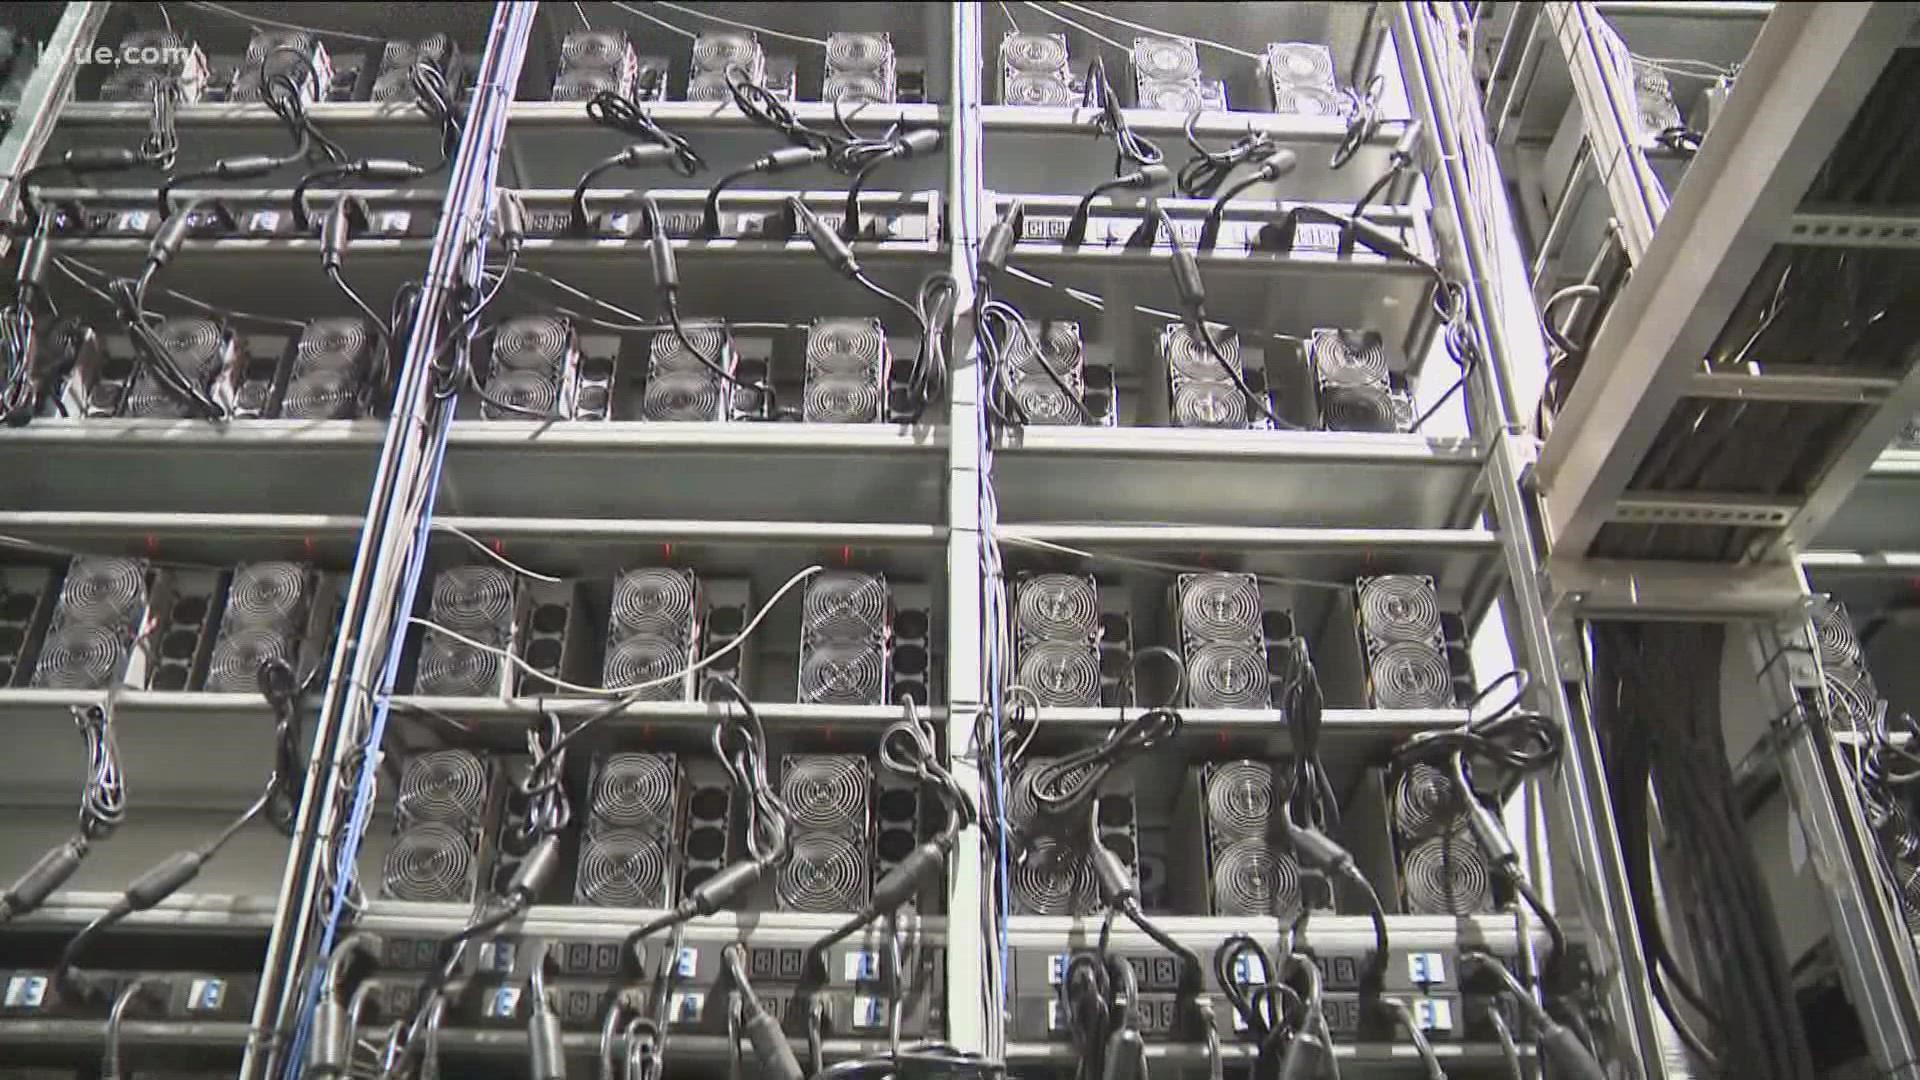 Texas Bitcoin mining facilities will be conserving power during this week's winter storm. The Riot Whinstone mining facility is in Rockdale, an hour from Austin.